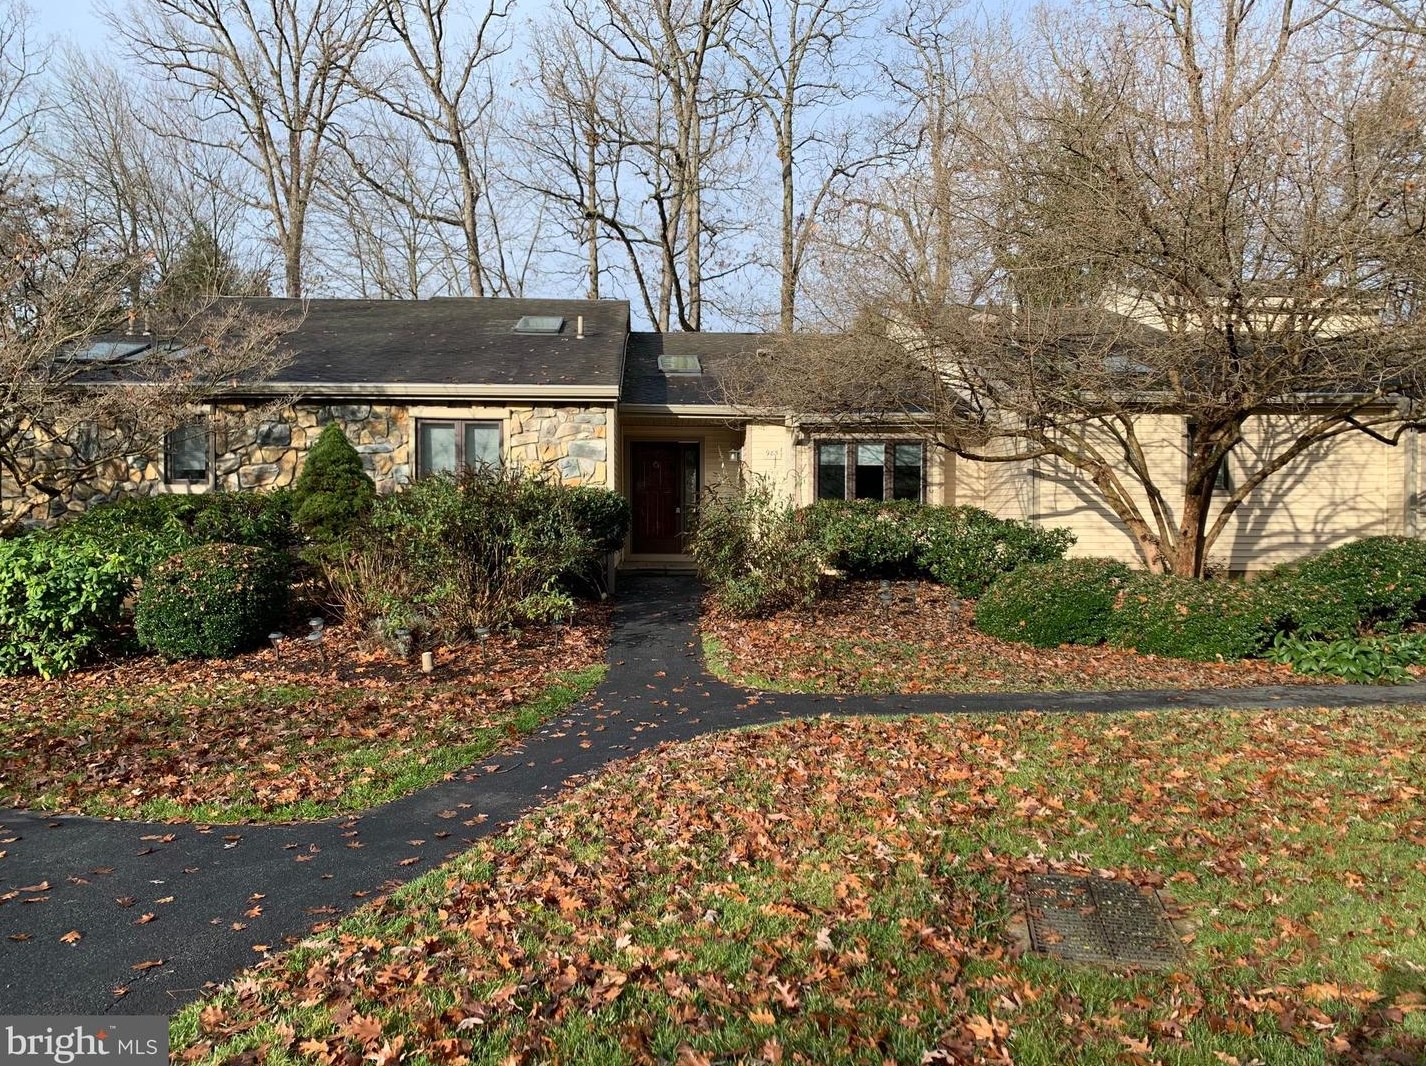 985 Kennett Way, West Chester, PA 19380